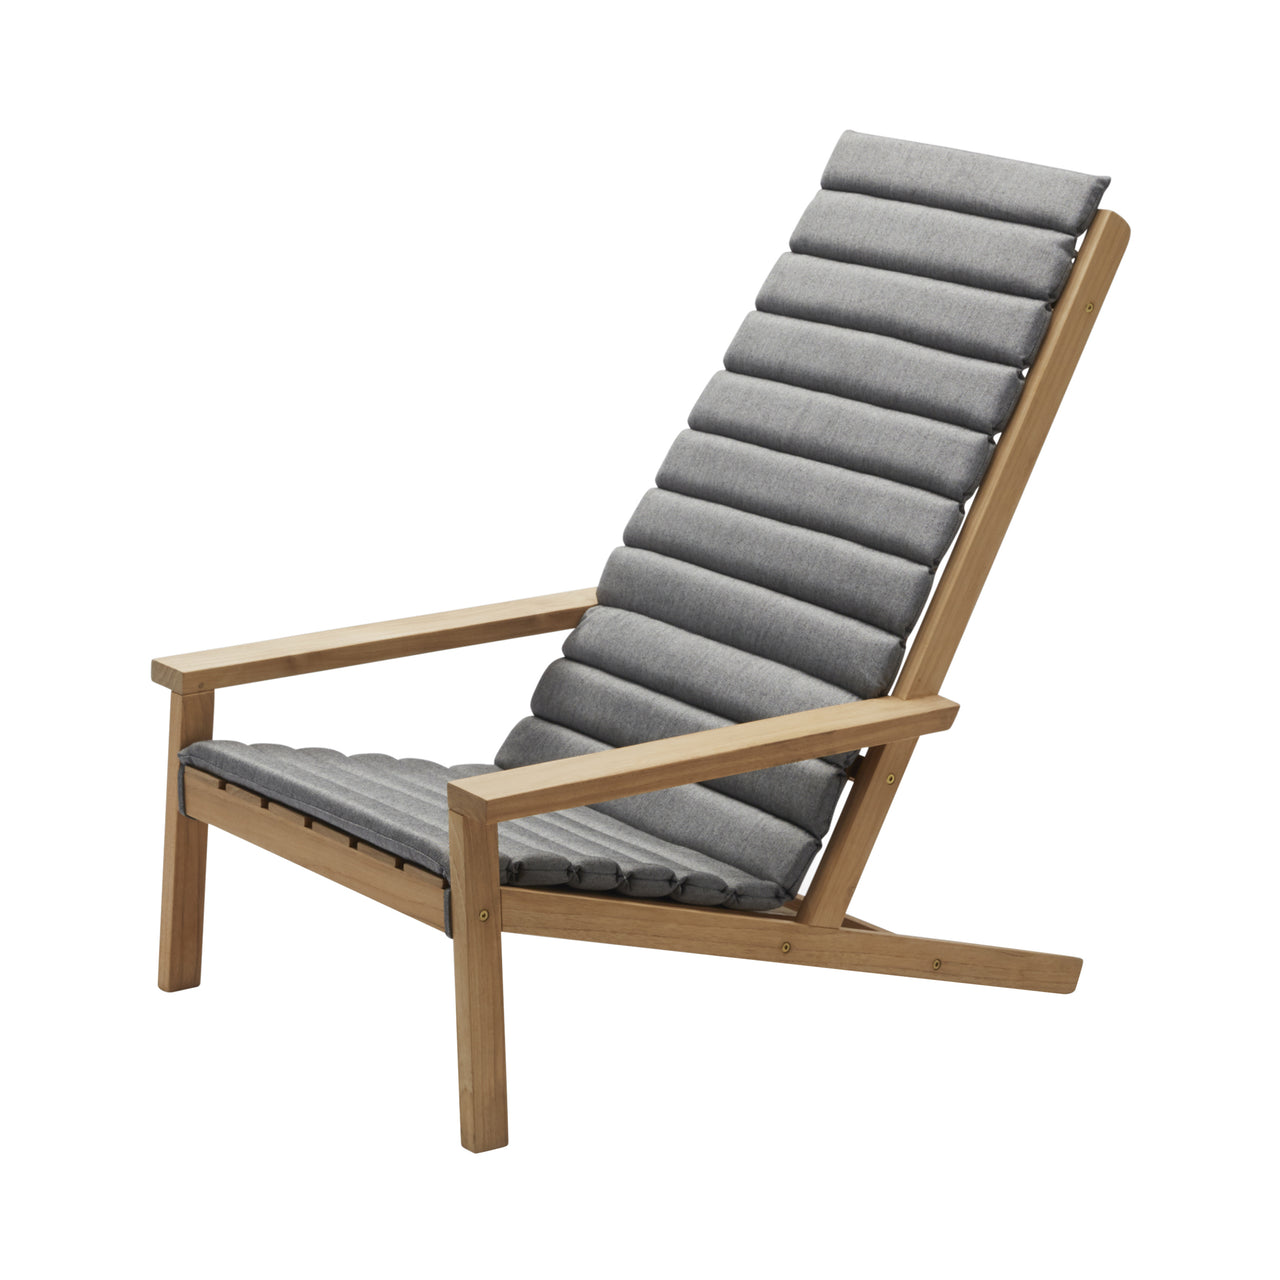 Between Lines Deck Chair: With Ash Cushion